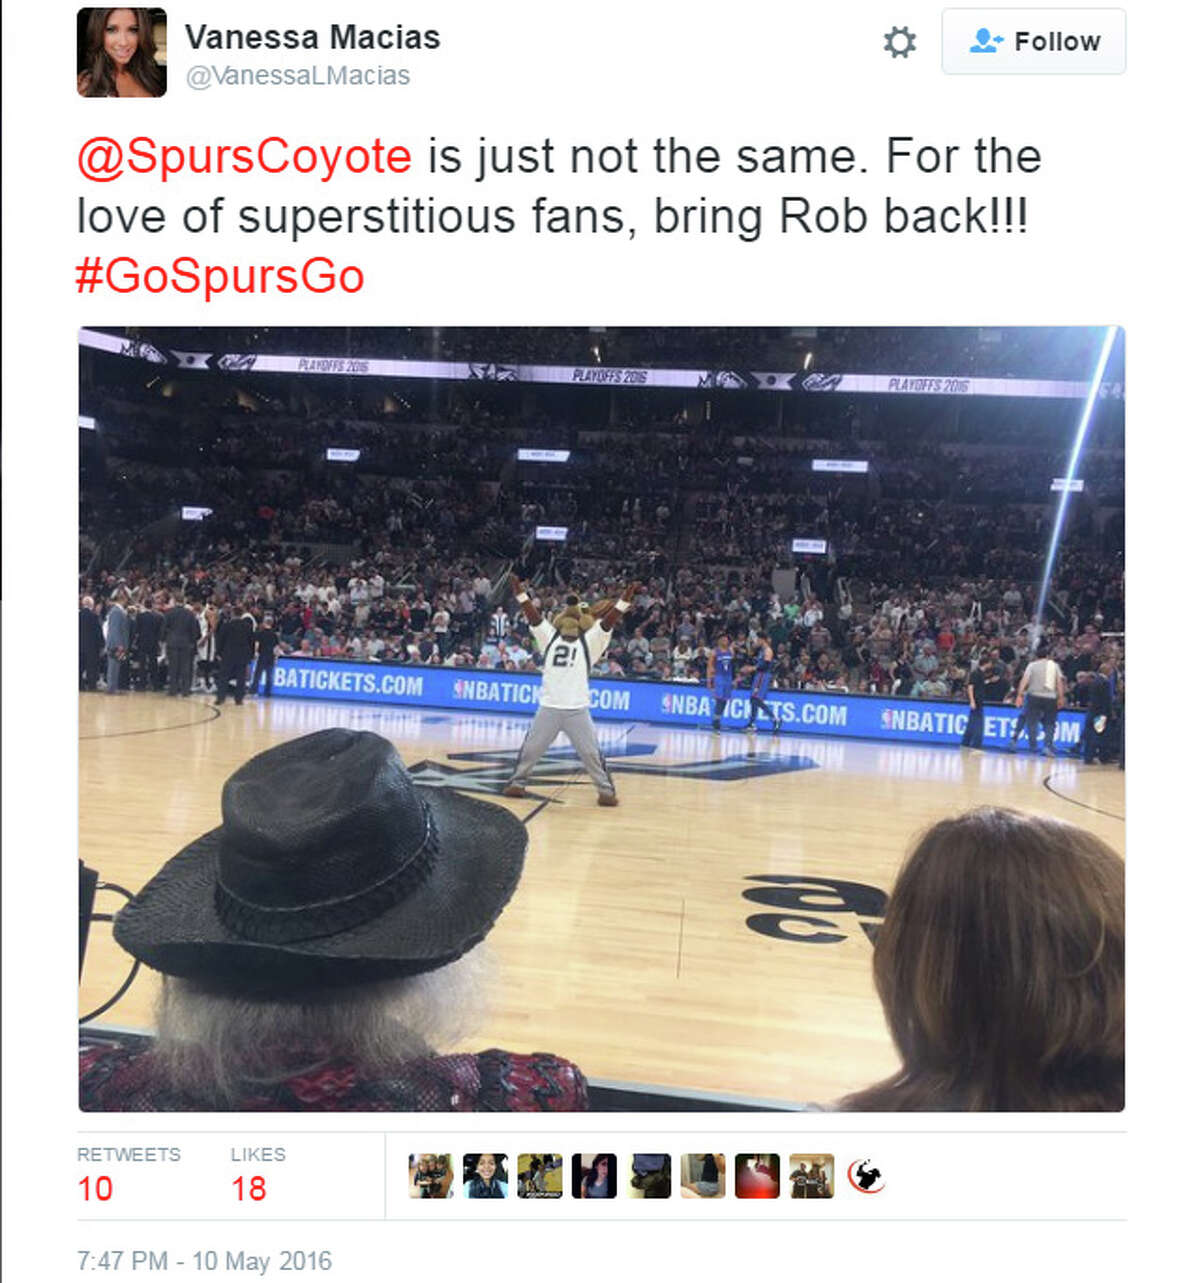 The Coyote changed, which is throwing off the jujuTweet : "@SpursCoyote is just not the same. For the love of superstitious fans, bring Rob back!!! #GoSpursGo"